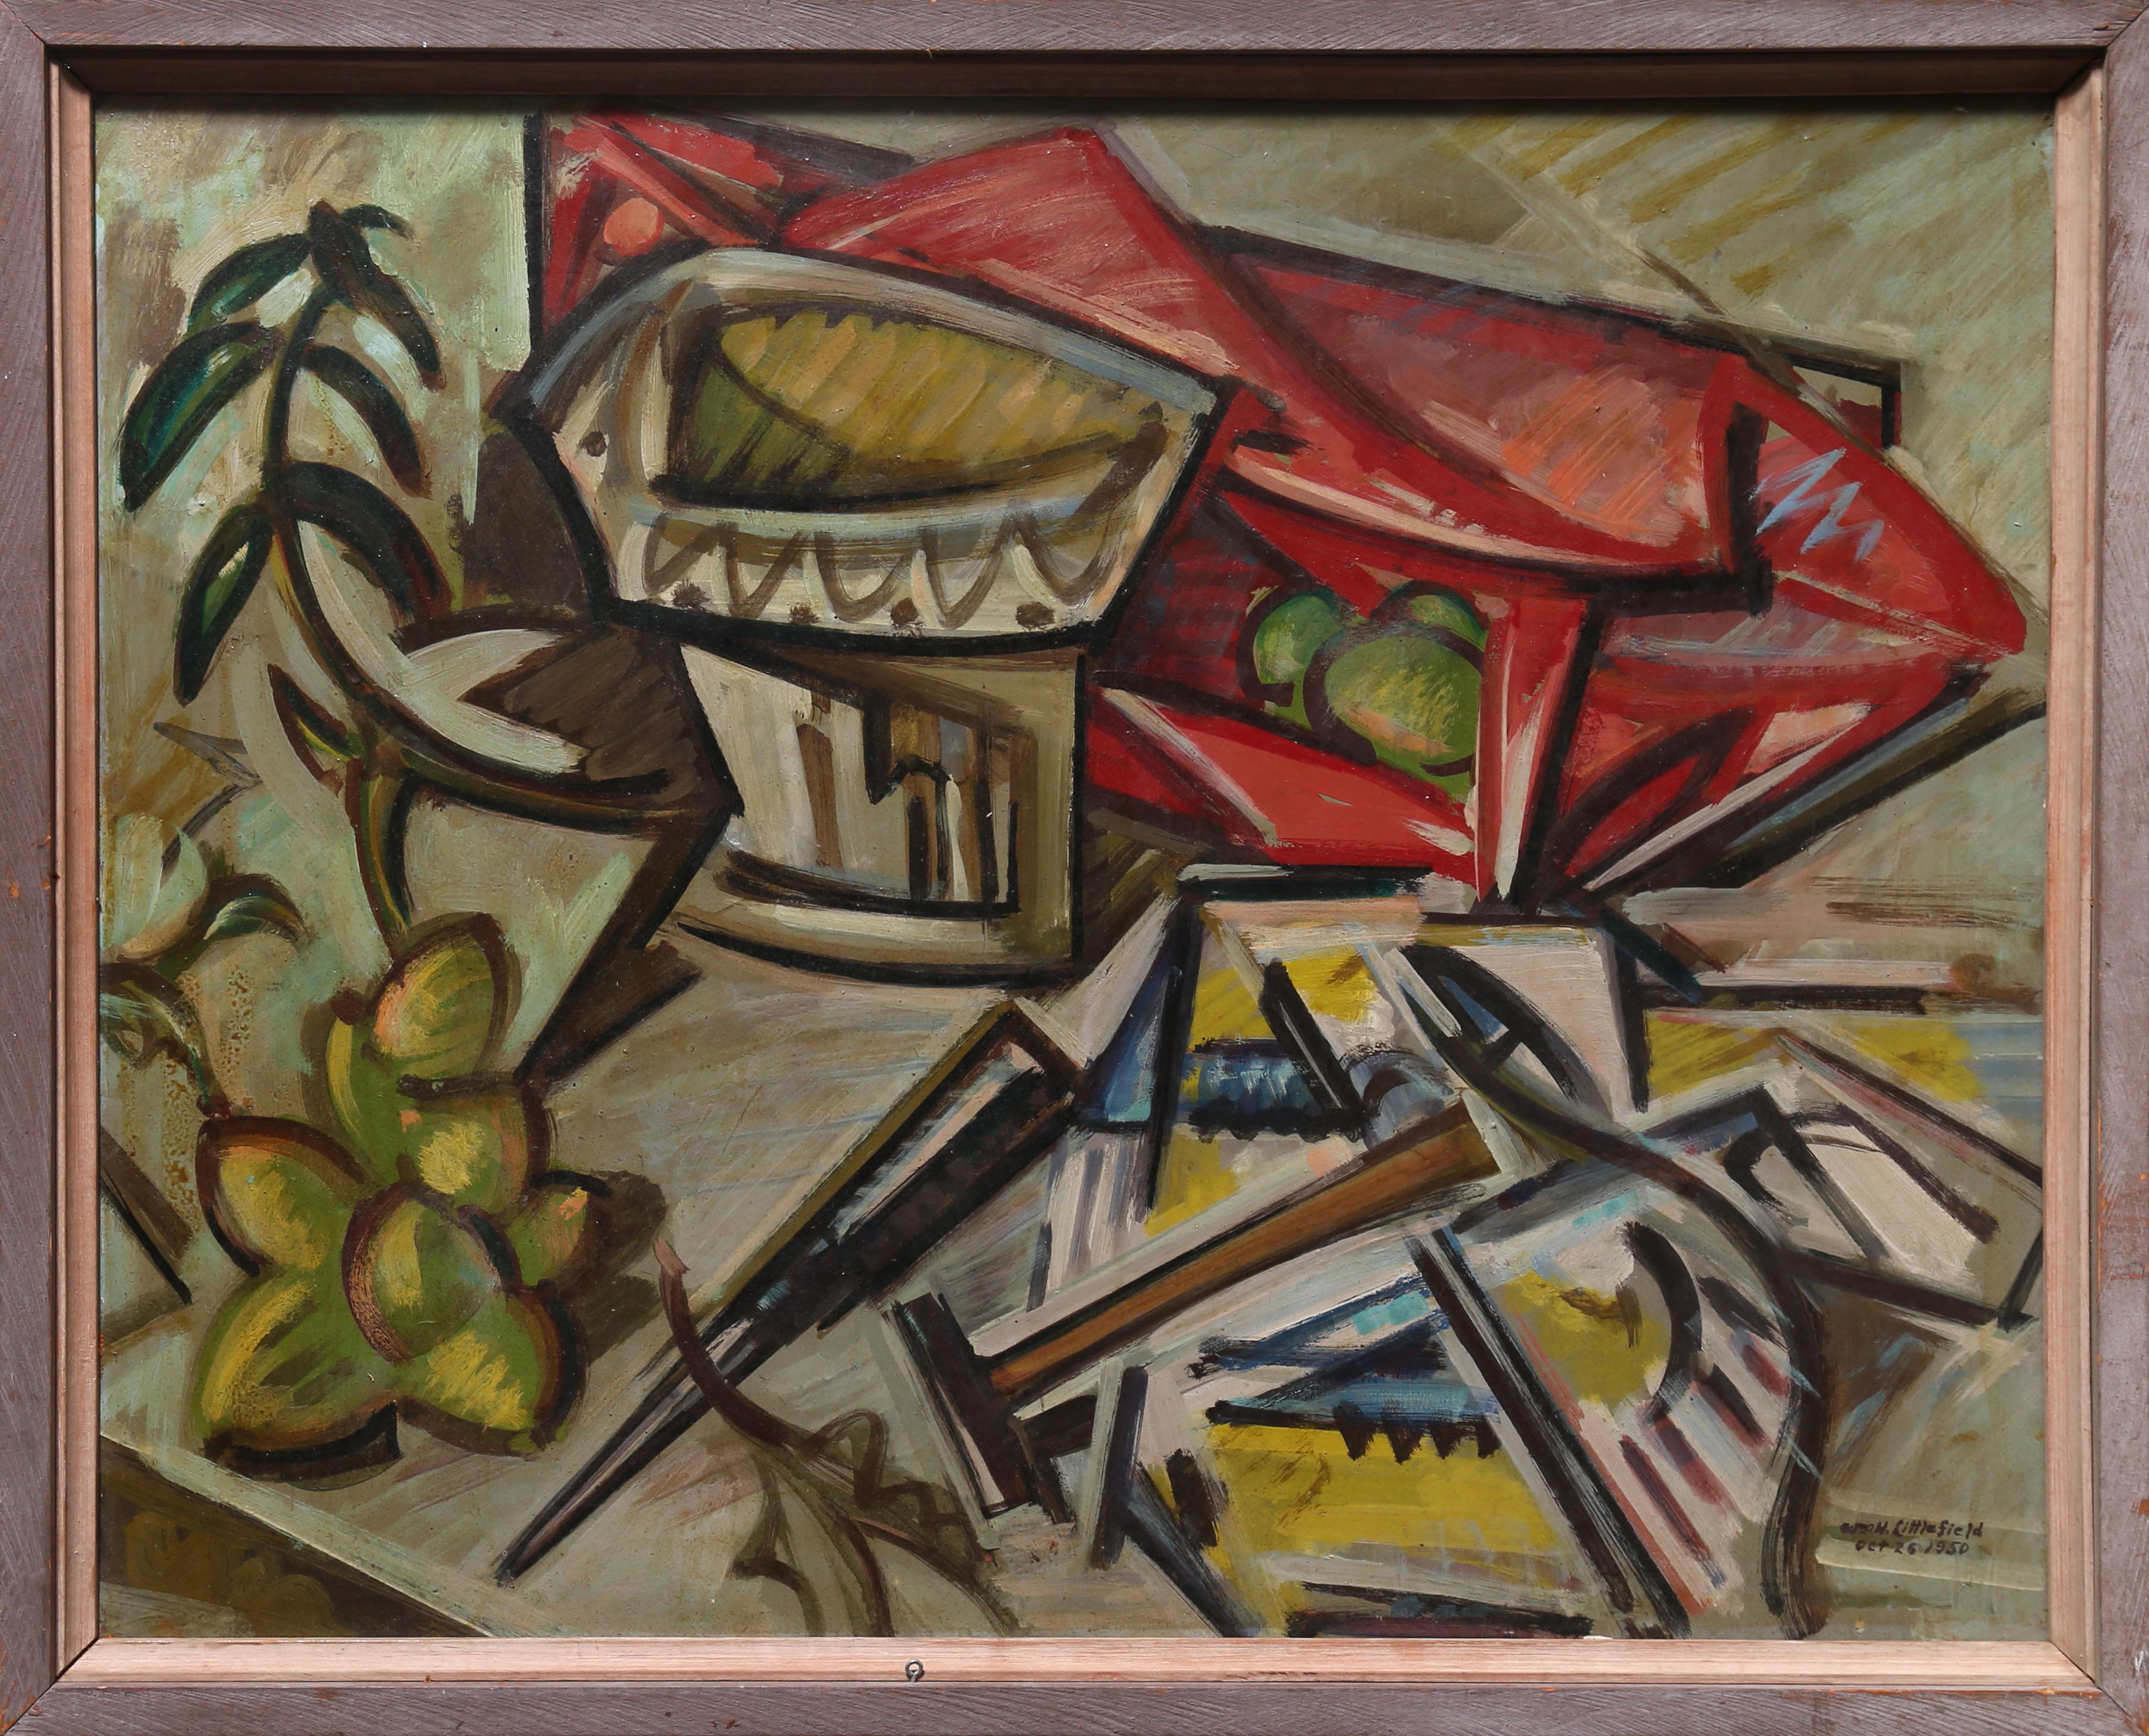 Double Sided Painting (Still Life and Abstract) by William Littlefield 1950-1954